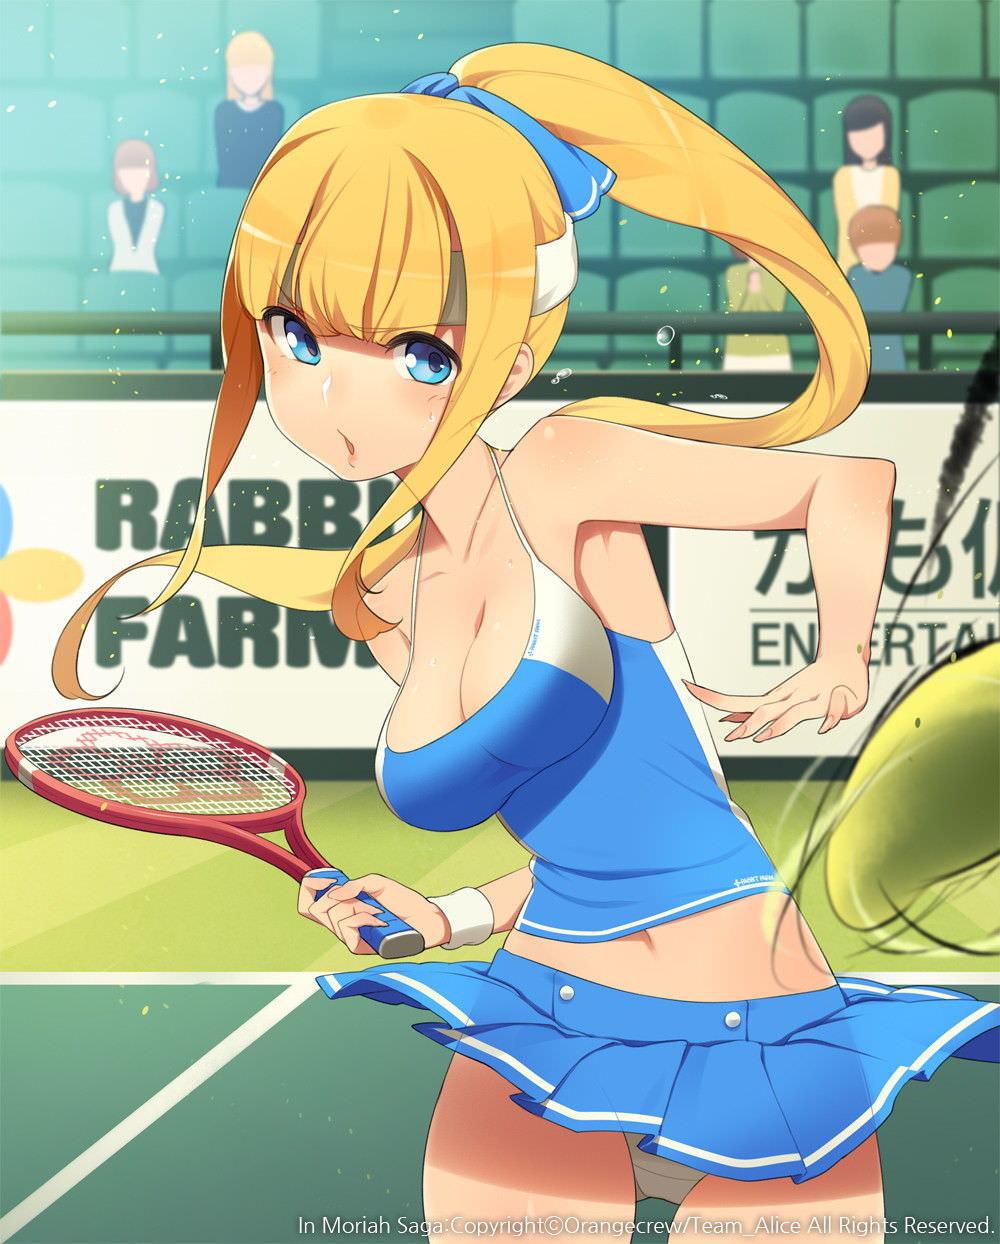 Secondary images of pretty girls look good in tennis! 4